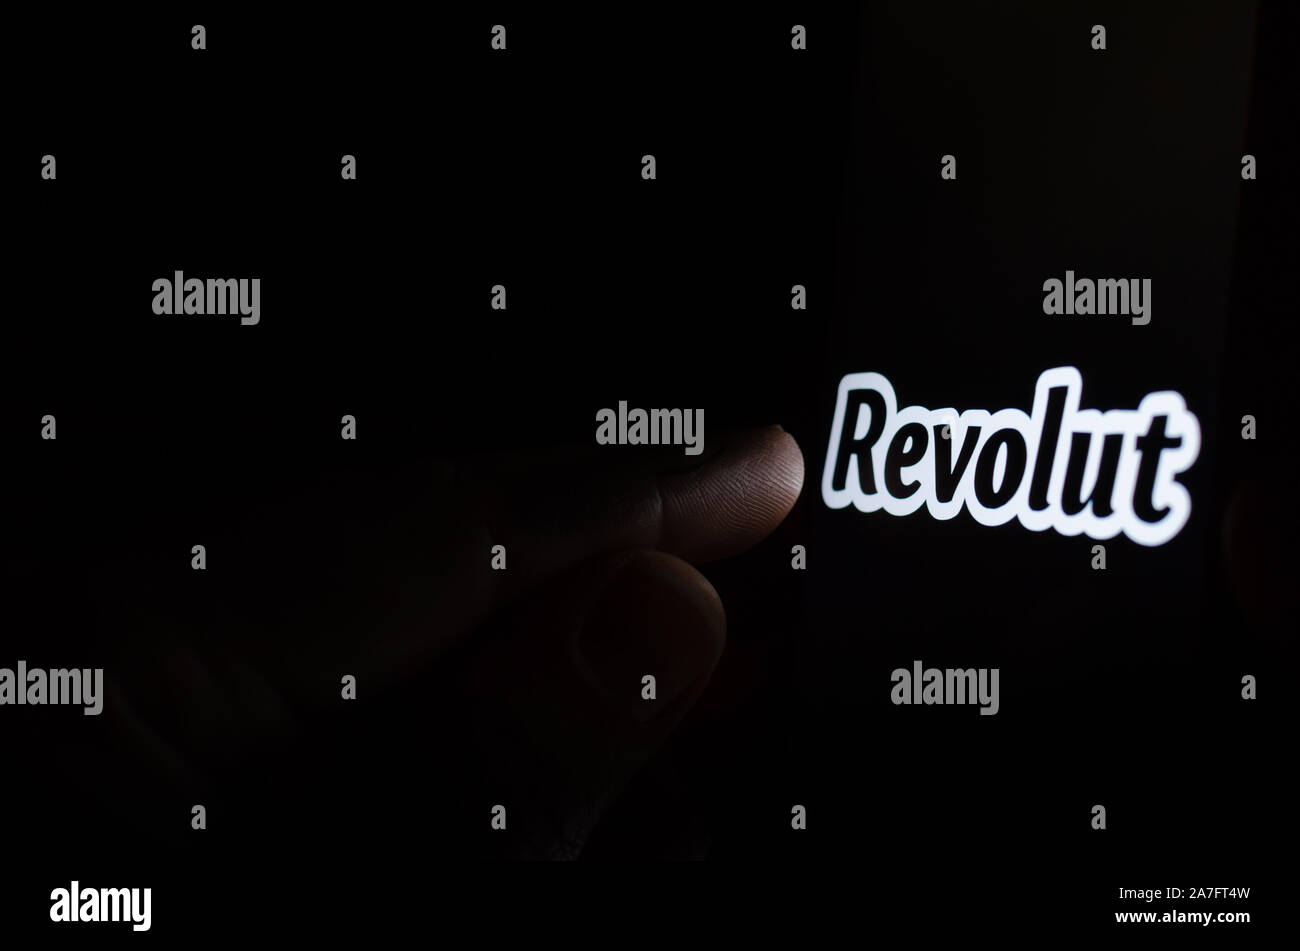 Revolut bank logo on a smartphone screen in a dark room and a finger touching it. Stock Photo